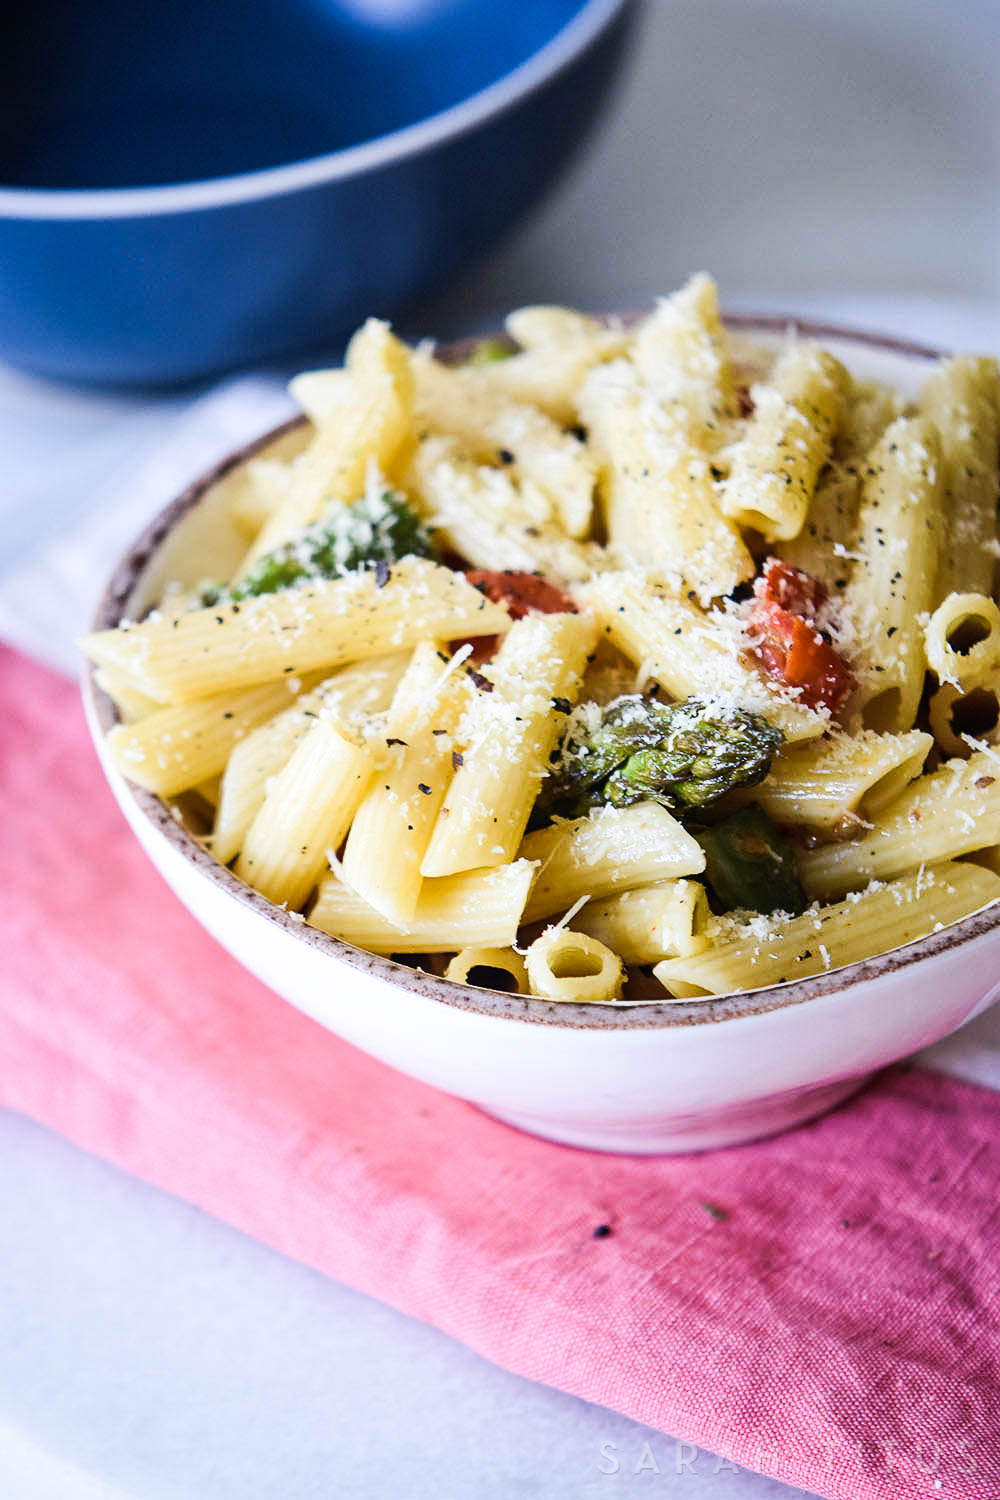 This Roasted Veggies Pasta is a quick and healthy recipe that is perfect for busy weekday evenings. It is also a great way to add more vegetarian meals to your diet!